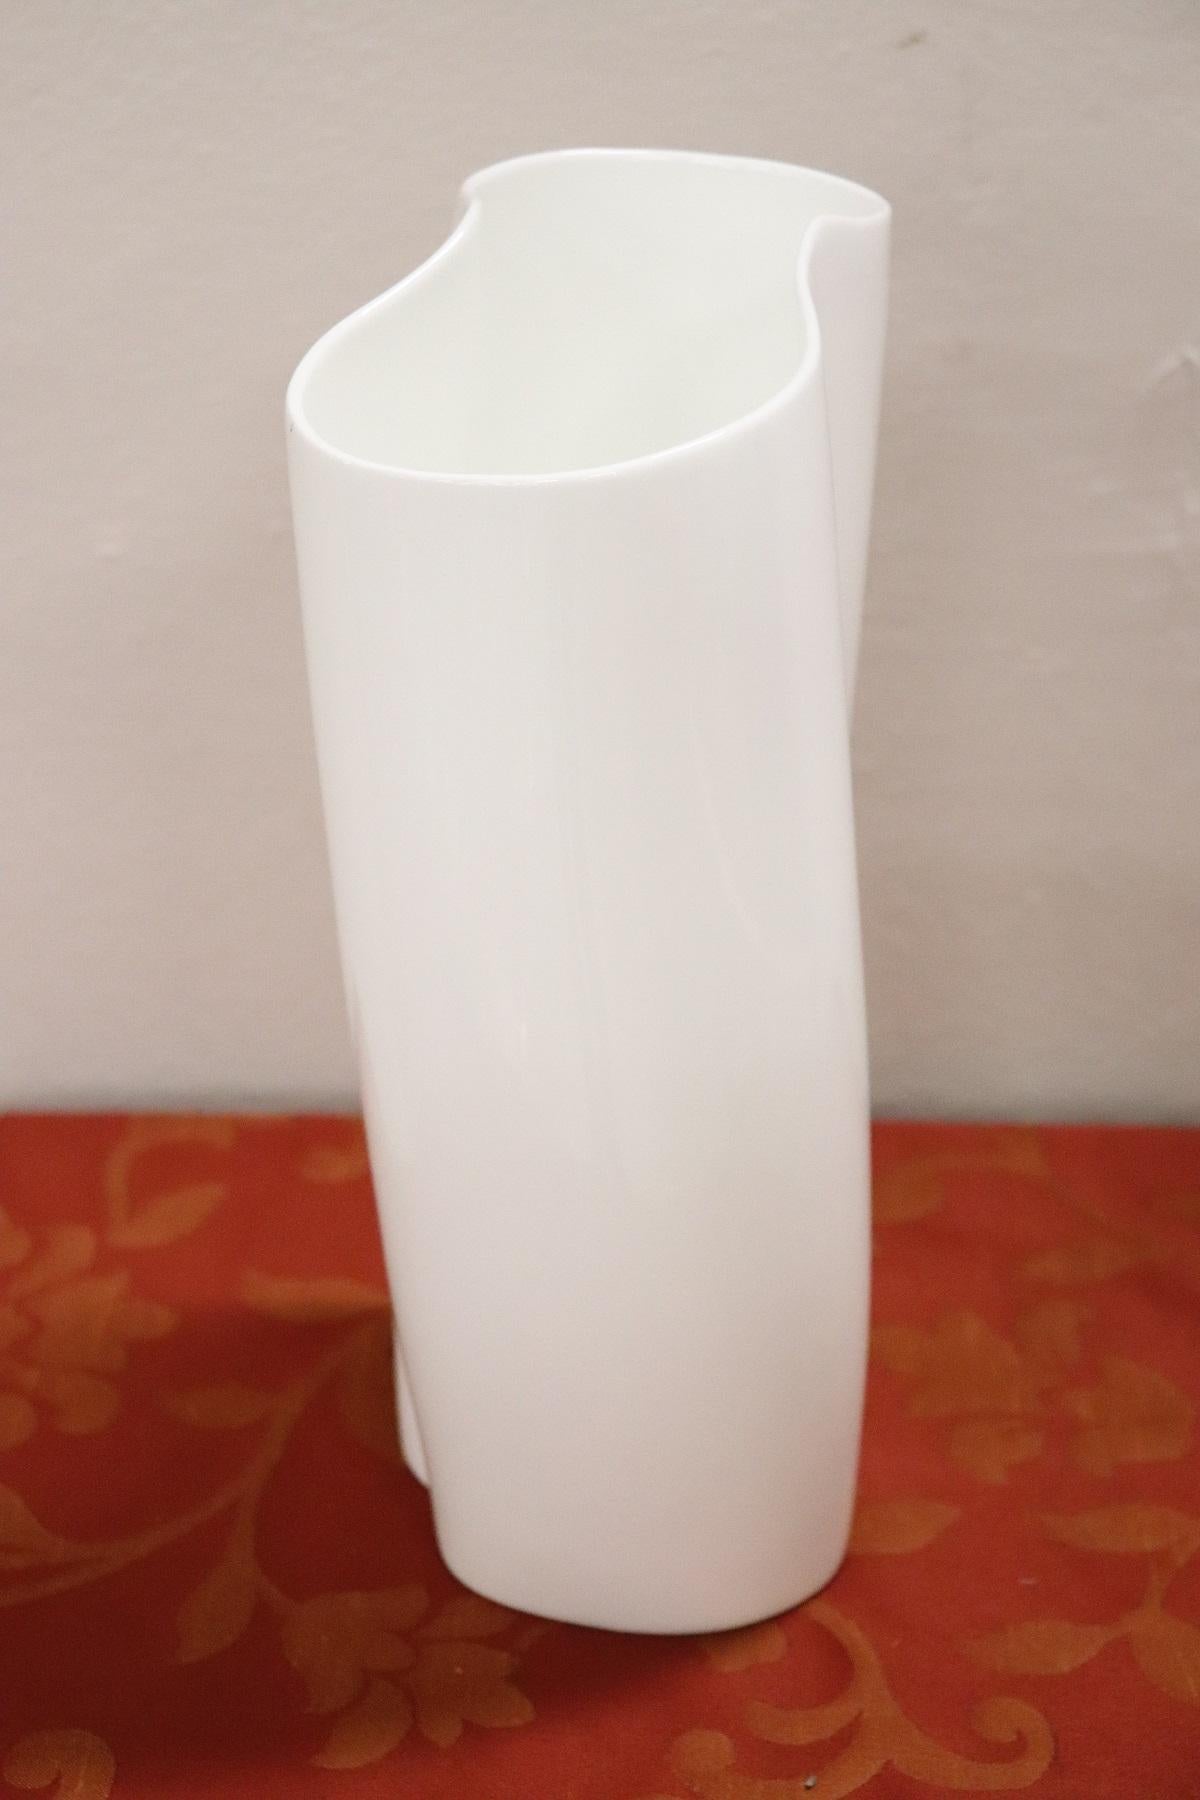 Refined ceramic vase in white color modern design signed Richard Ginori. Particular form move. Ideal as a piece of furniture for modern and vintage environments.